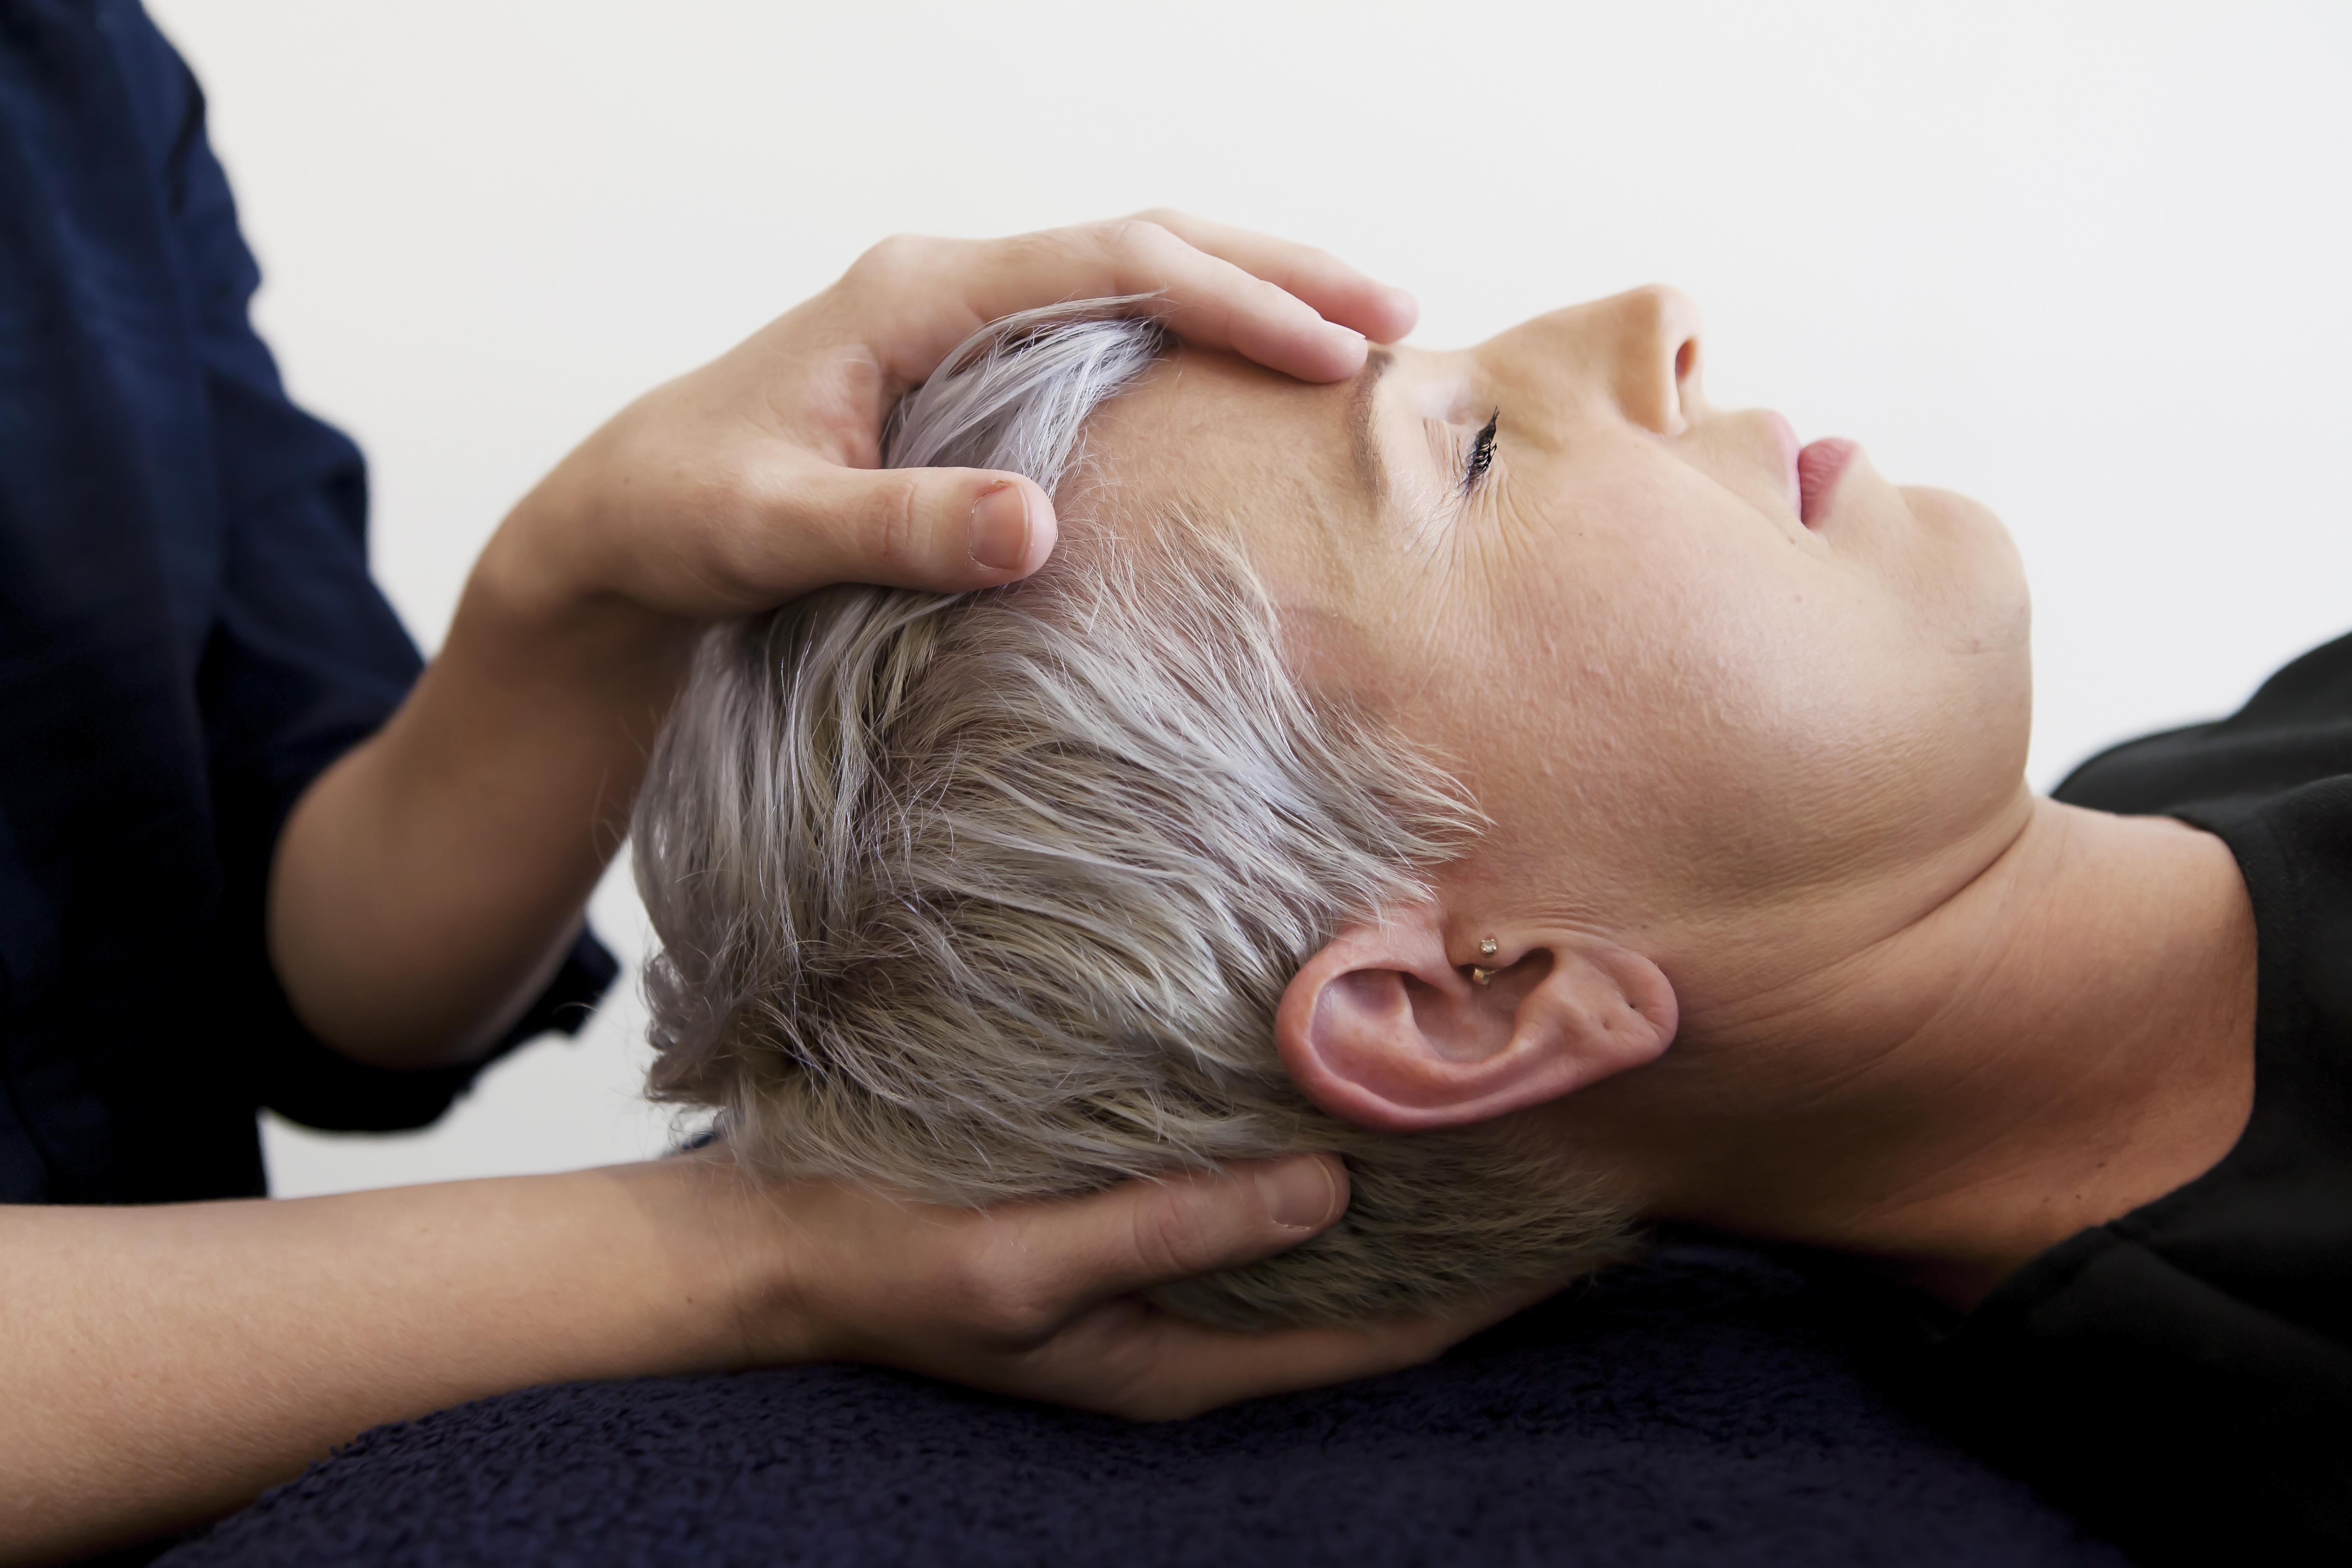 Intro to Upledger CranioSacral Therapy for Practitioners